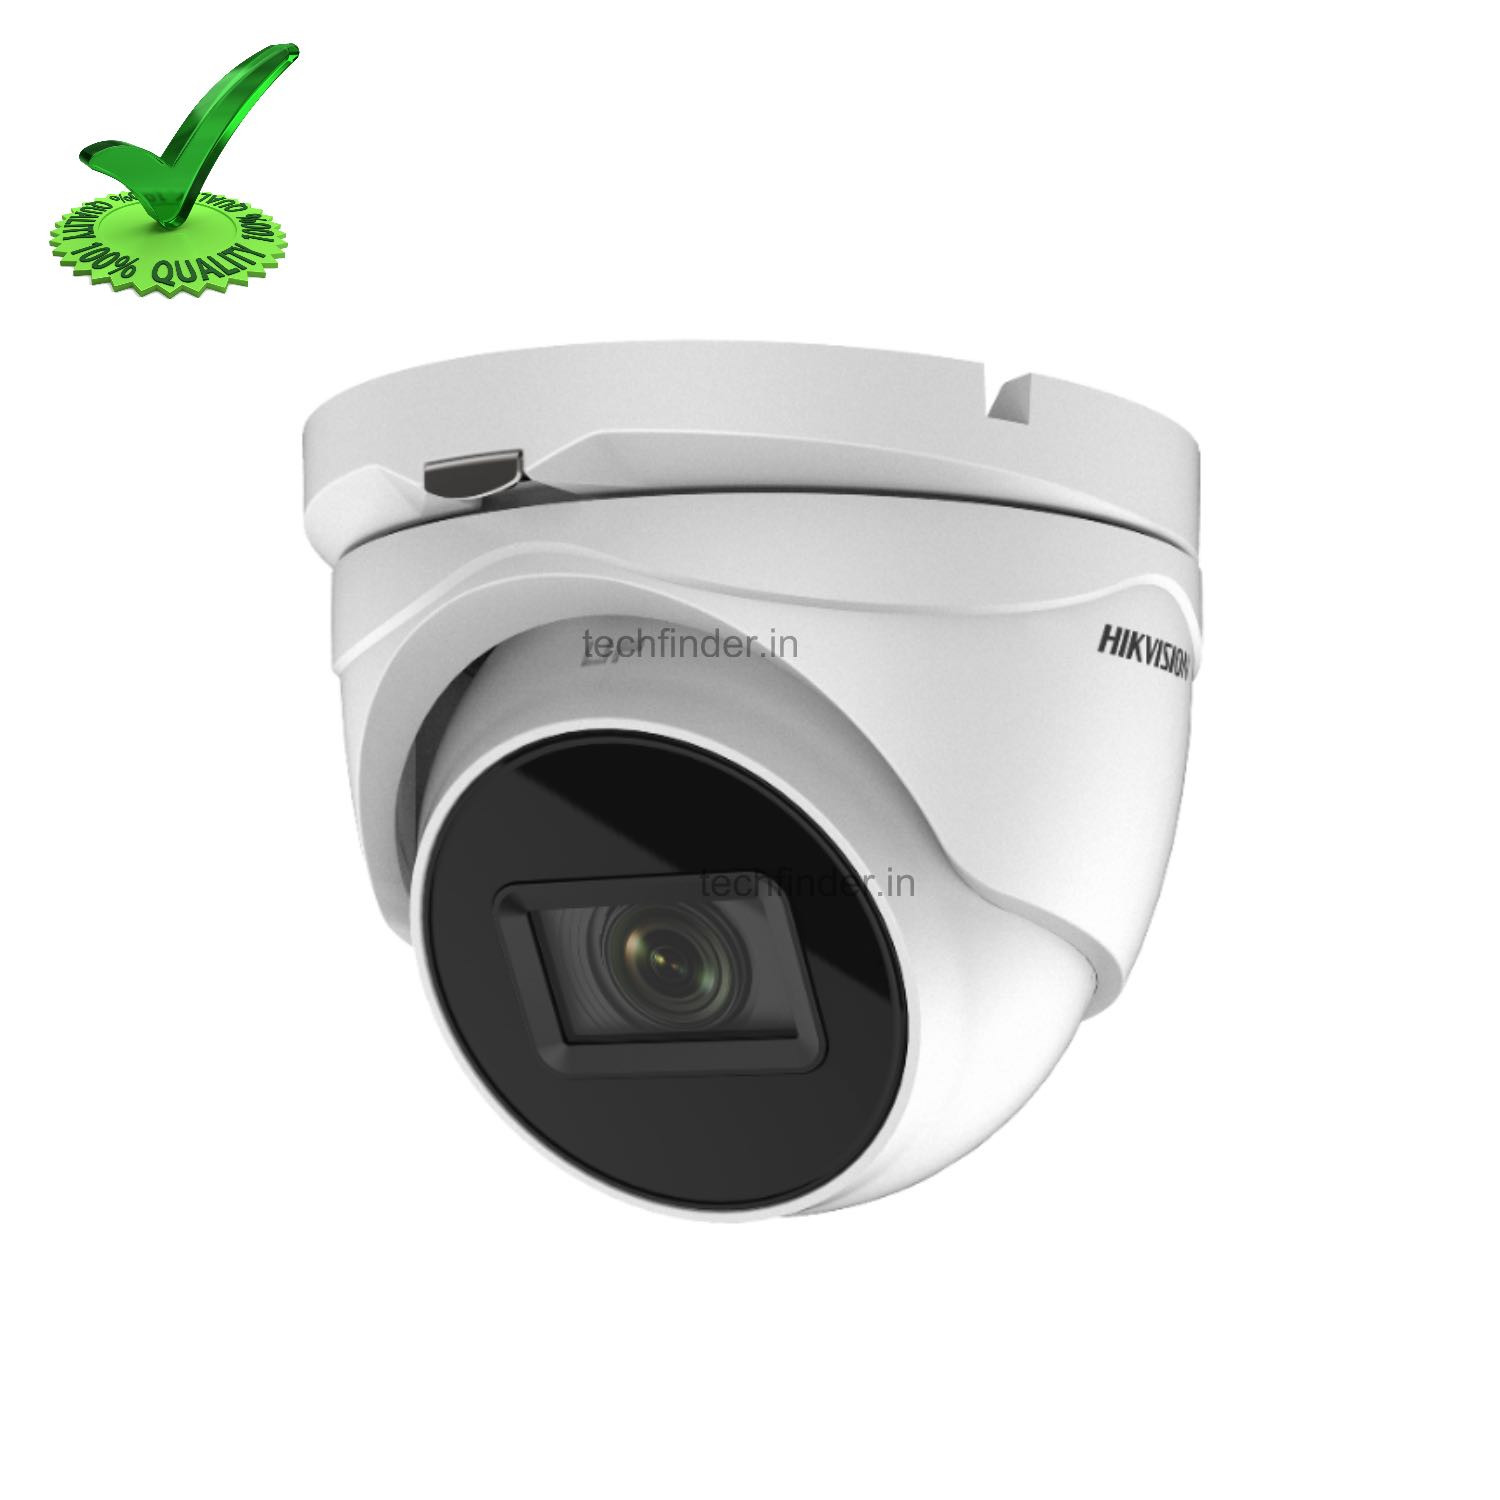 Hikvision DS-2CE79D3T-IT3ZF 2MP Fully Metal HD Dome Camera